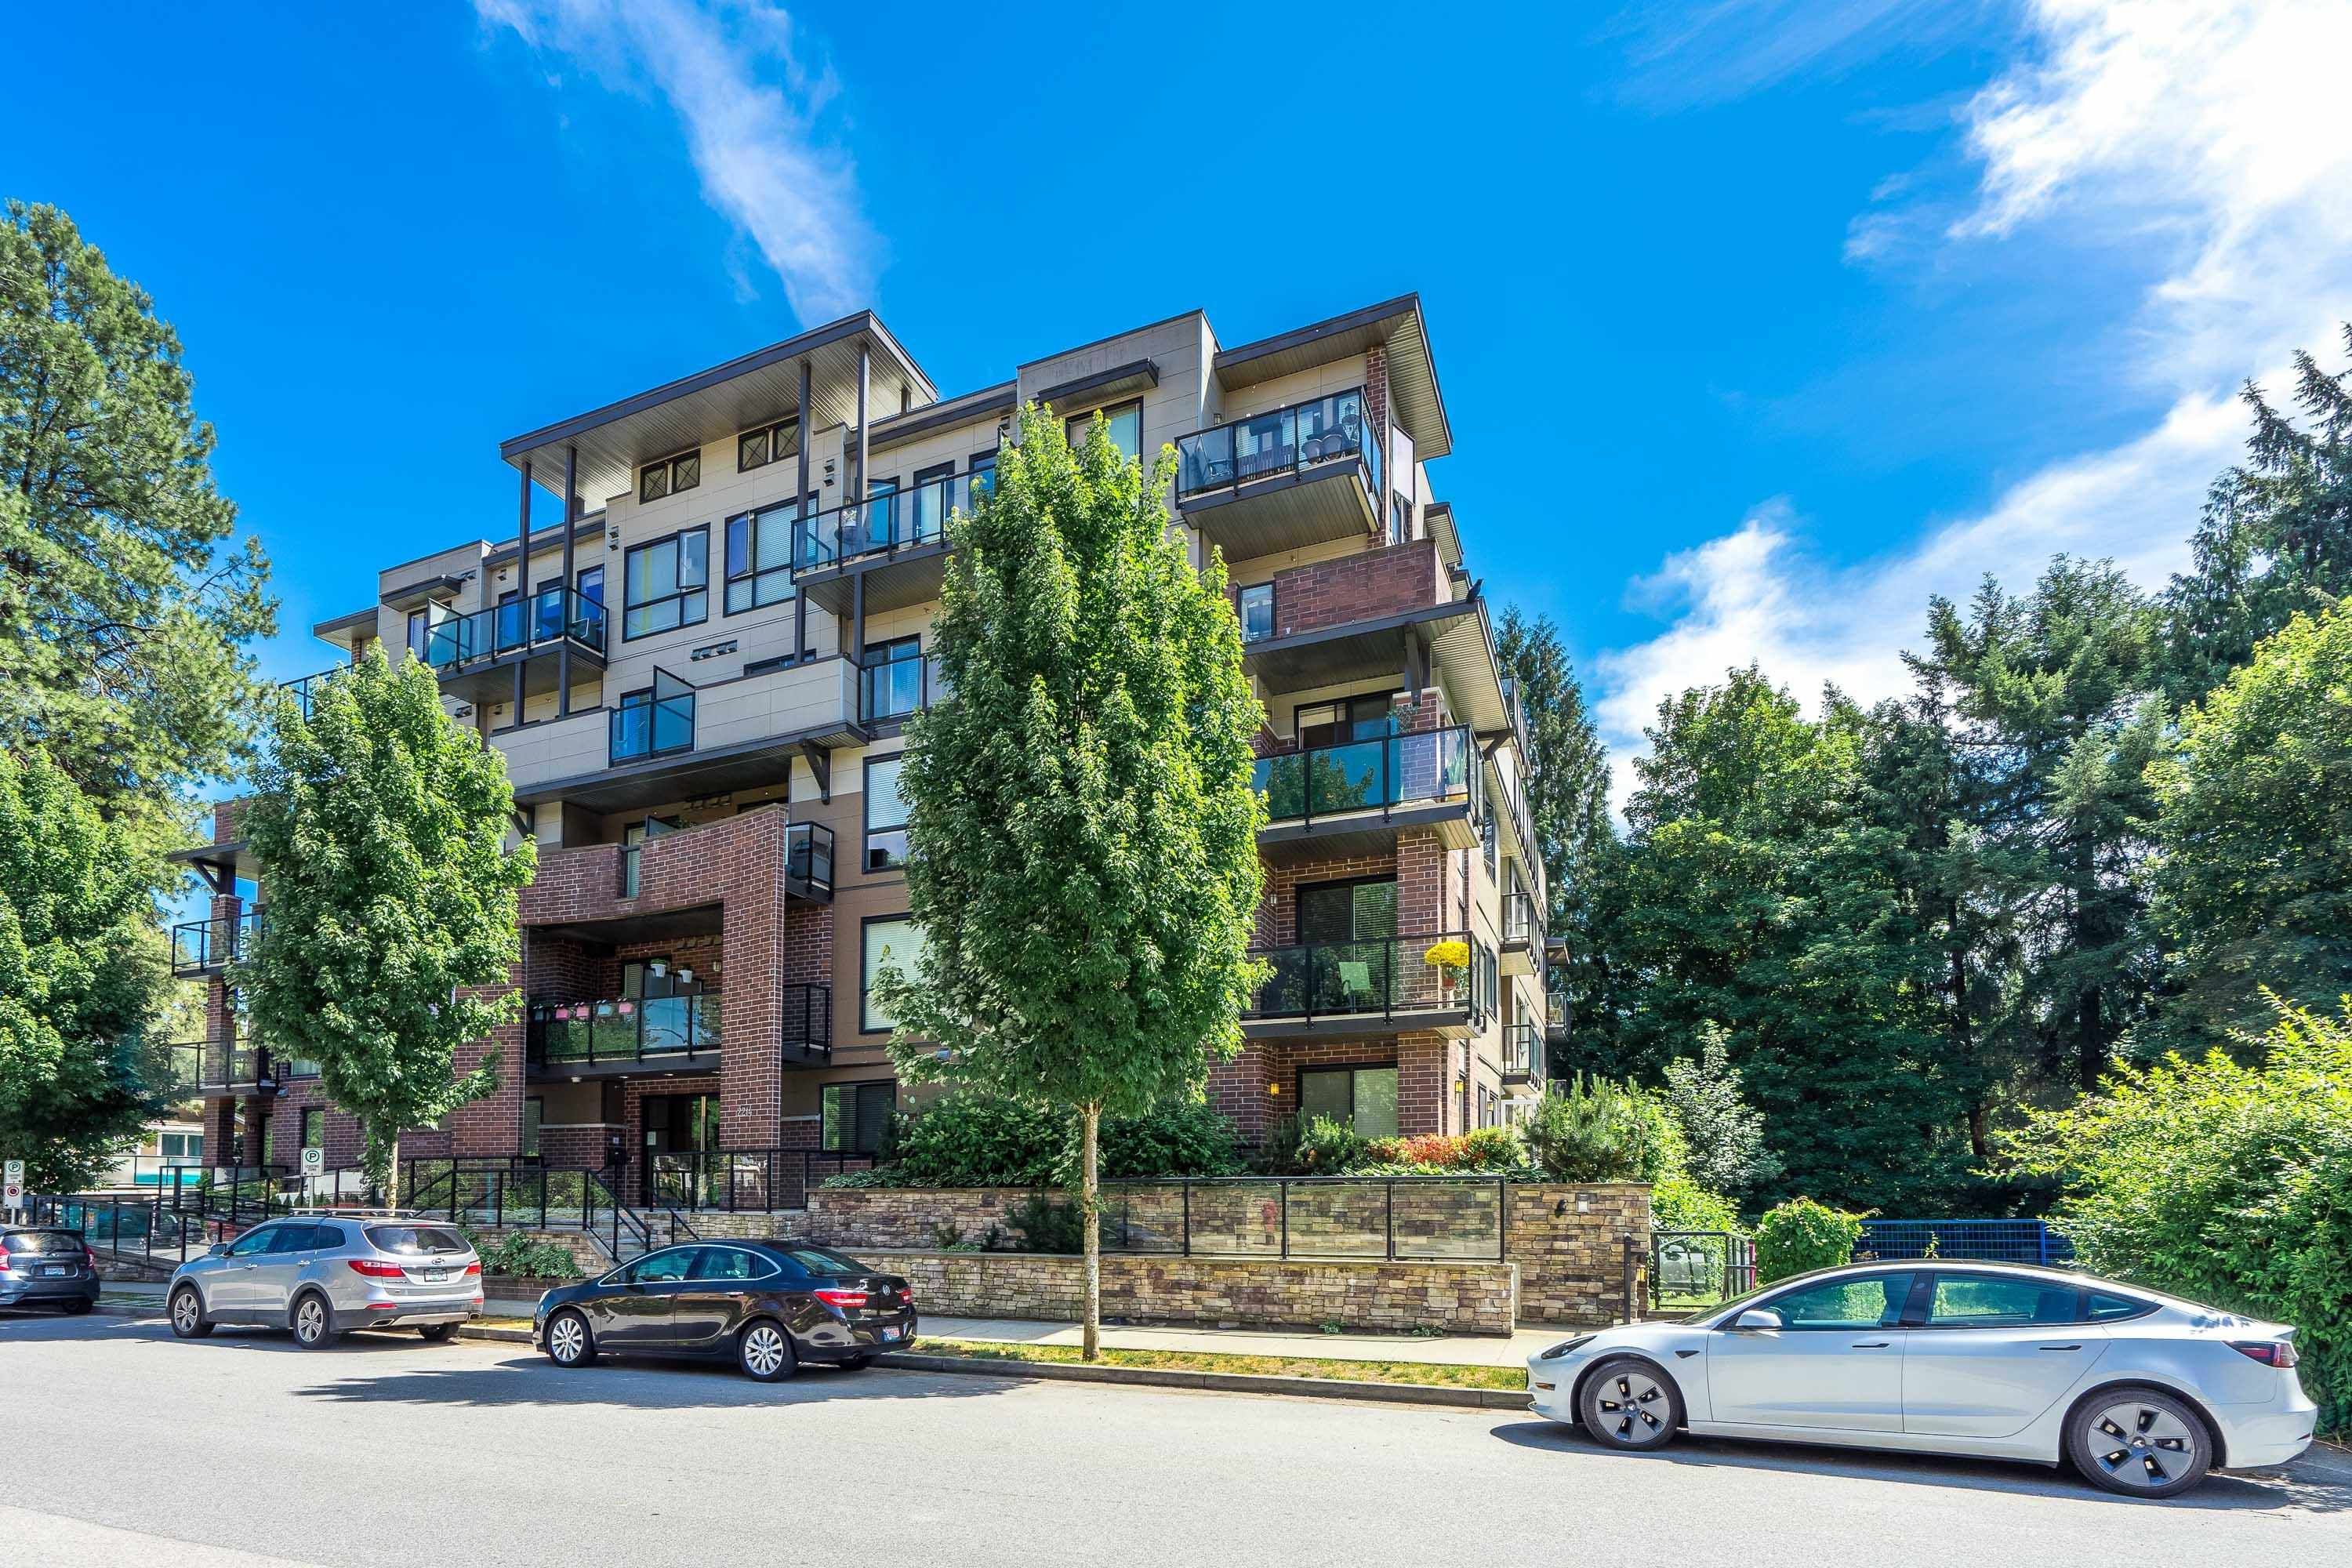 Open House. Open House on Sunday, September 24, 2023 2:00PM - 4:00PM
Please Text 604 561-4012 if I am not in the Lobby, I will be in Unit 109 showing so I can come right out thanks